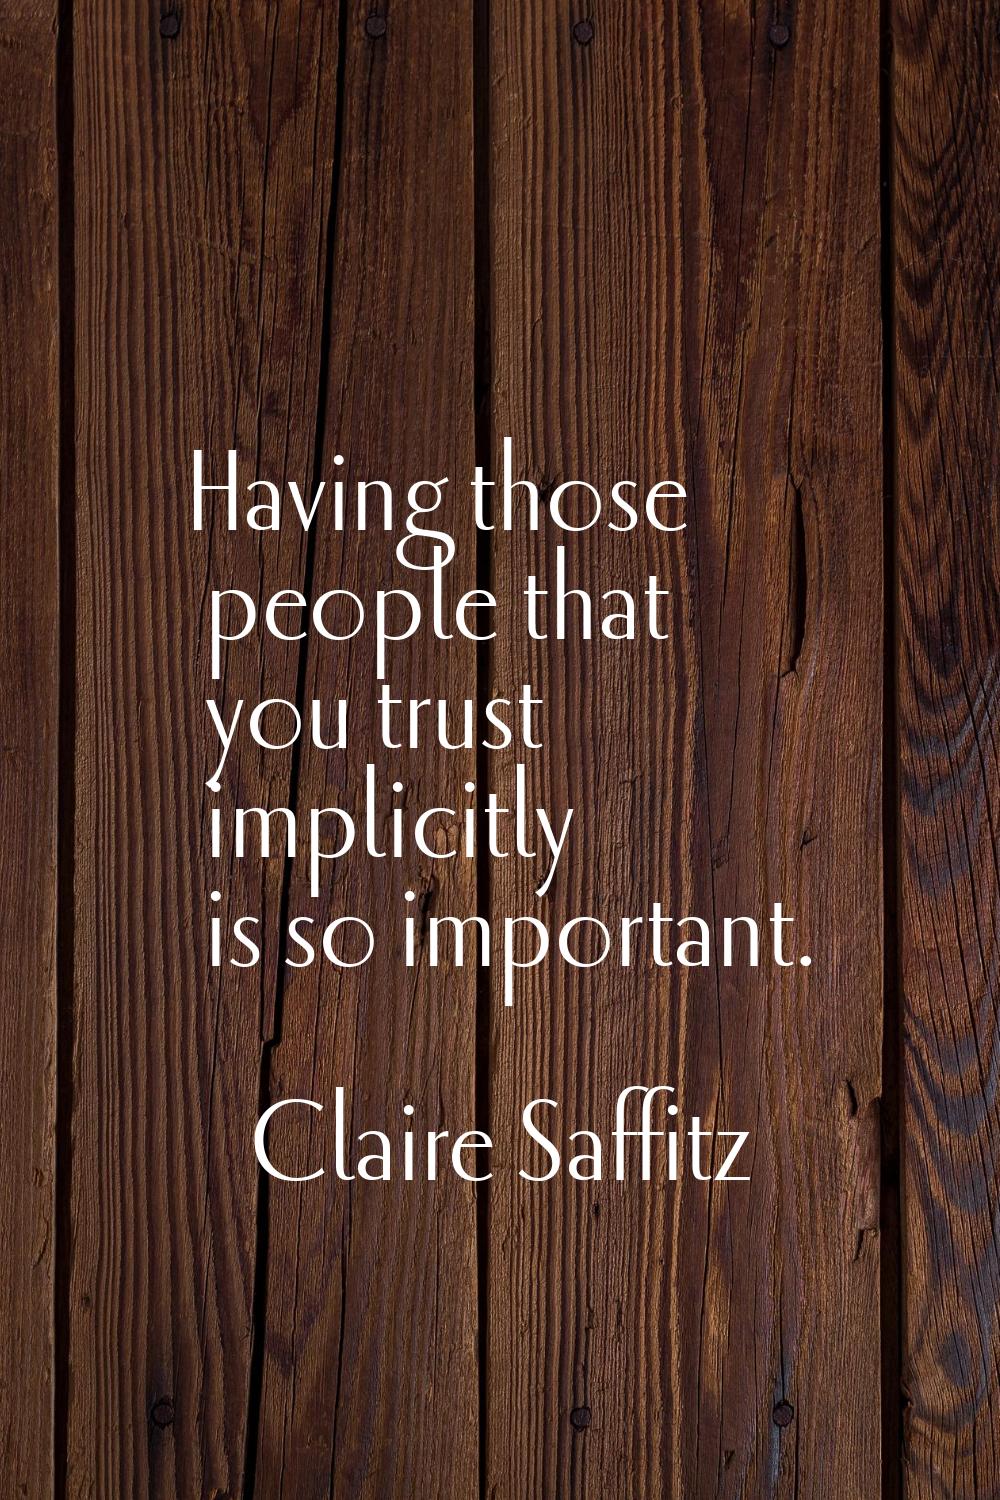 Having those people that you trust implicitly is so important.